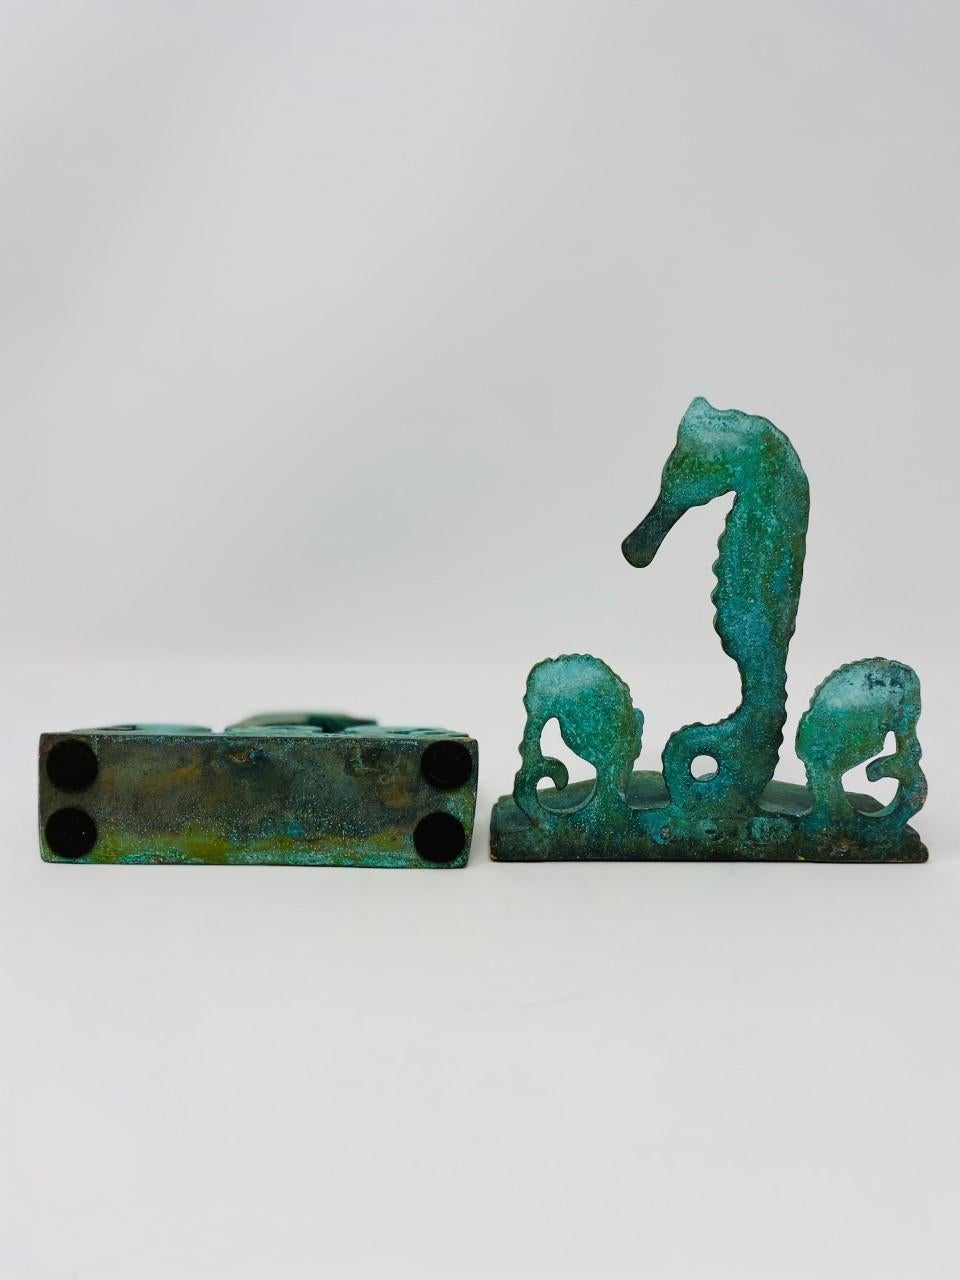 Cast Rare Vintage Brass Seahorse Bookends by Virginia Metalcrafters